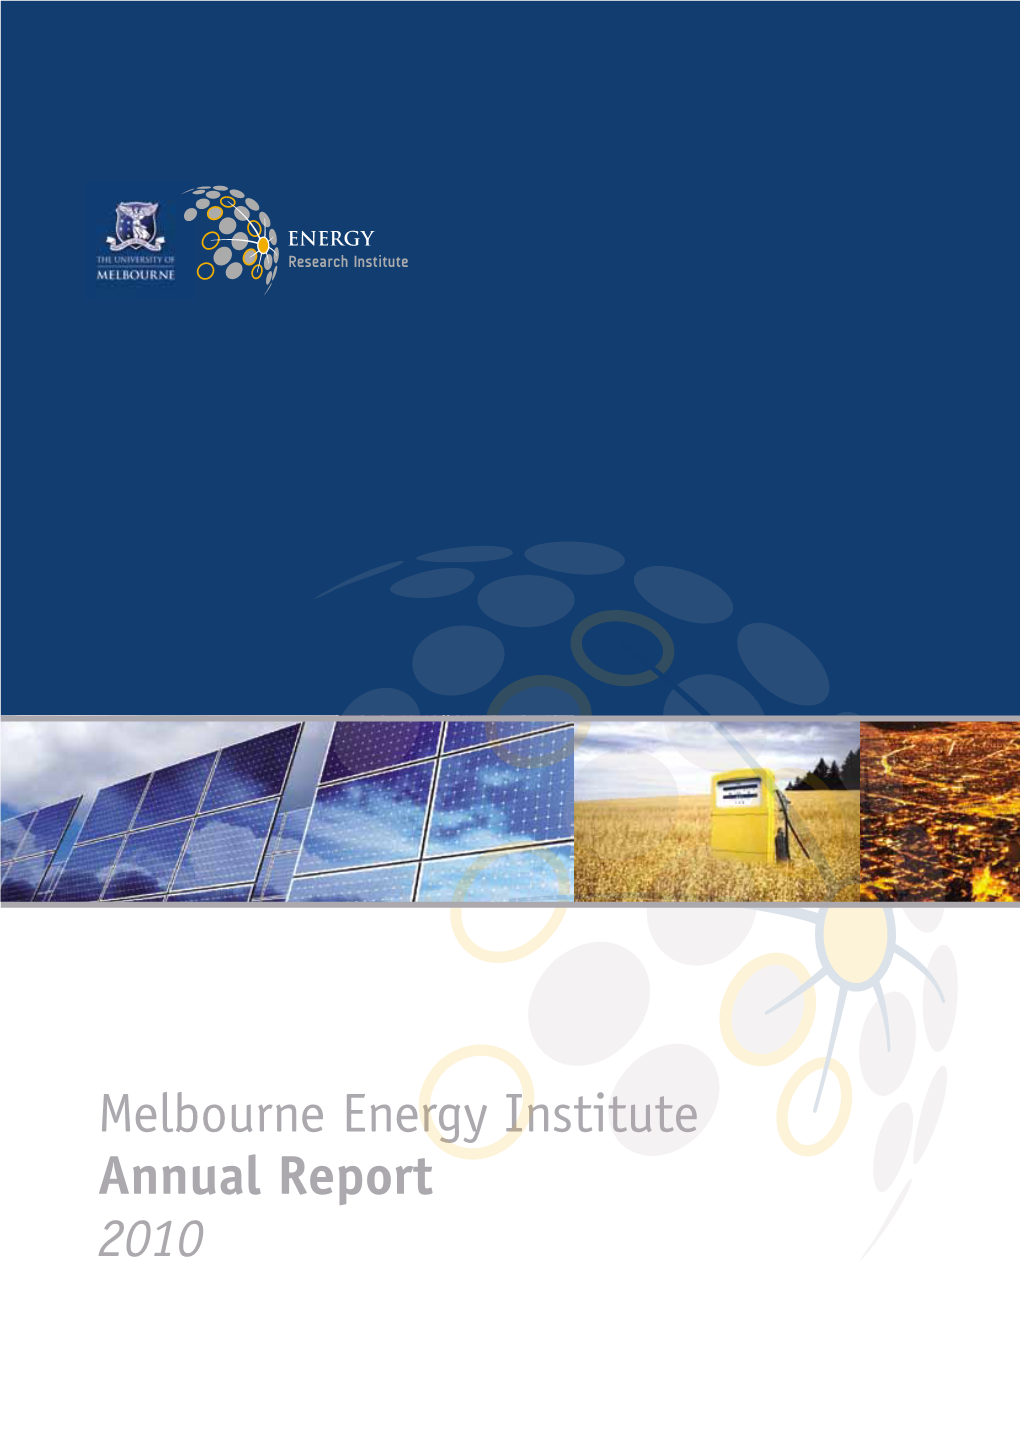 Melbourne Energy Institute Annual Report 2010 © the University of Melbourne